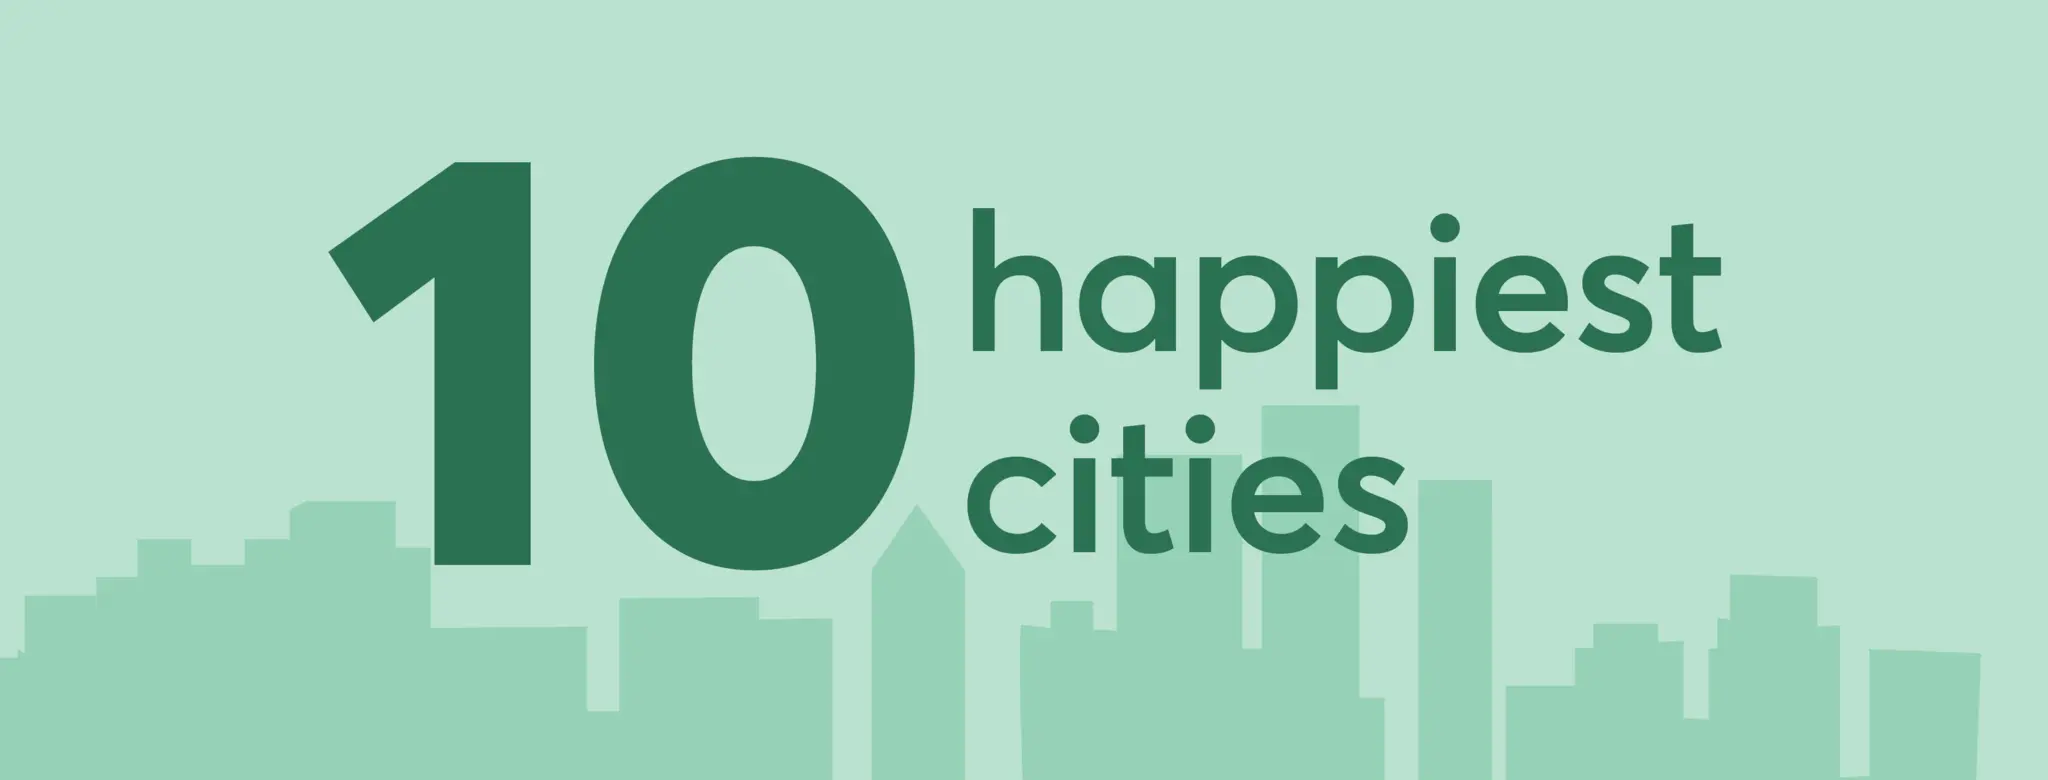 10 happiest cities text over a green skyline